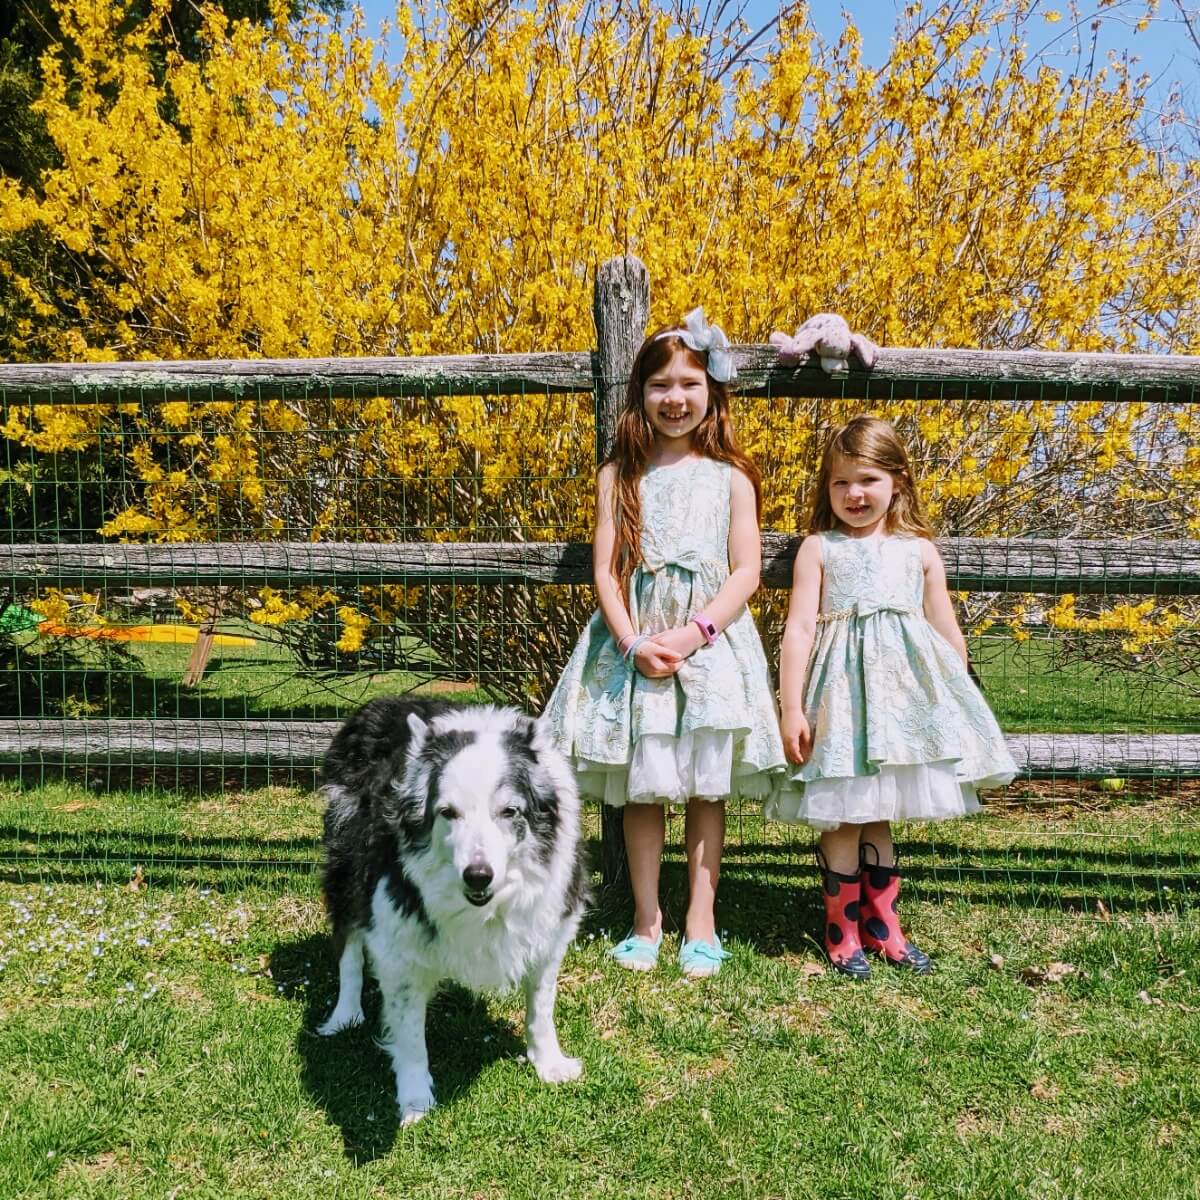 Sisters and Border Collie by a Forsythia Bush in Full Bloom on Easter 2021